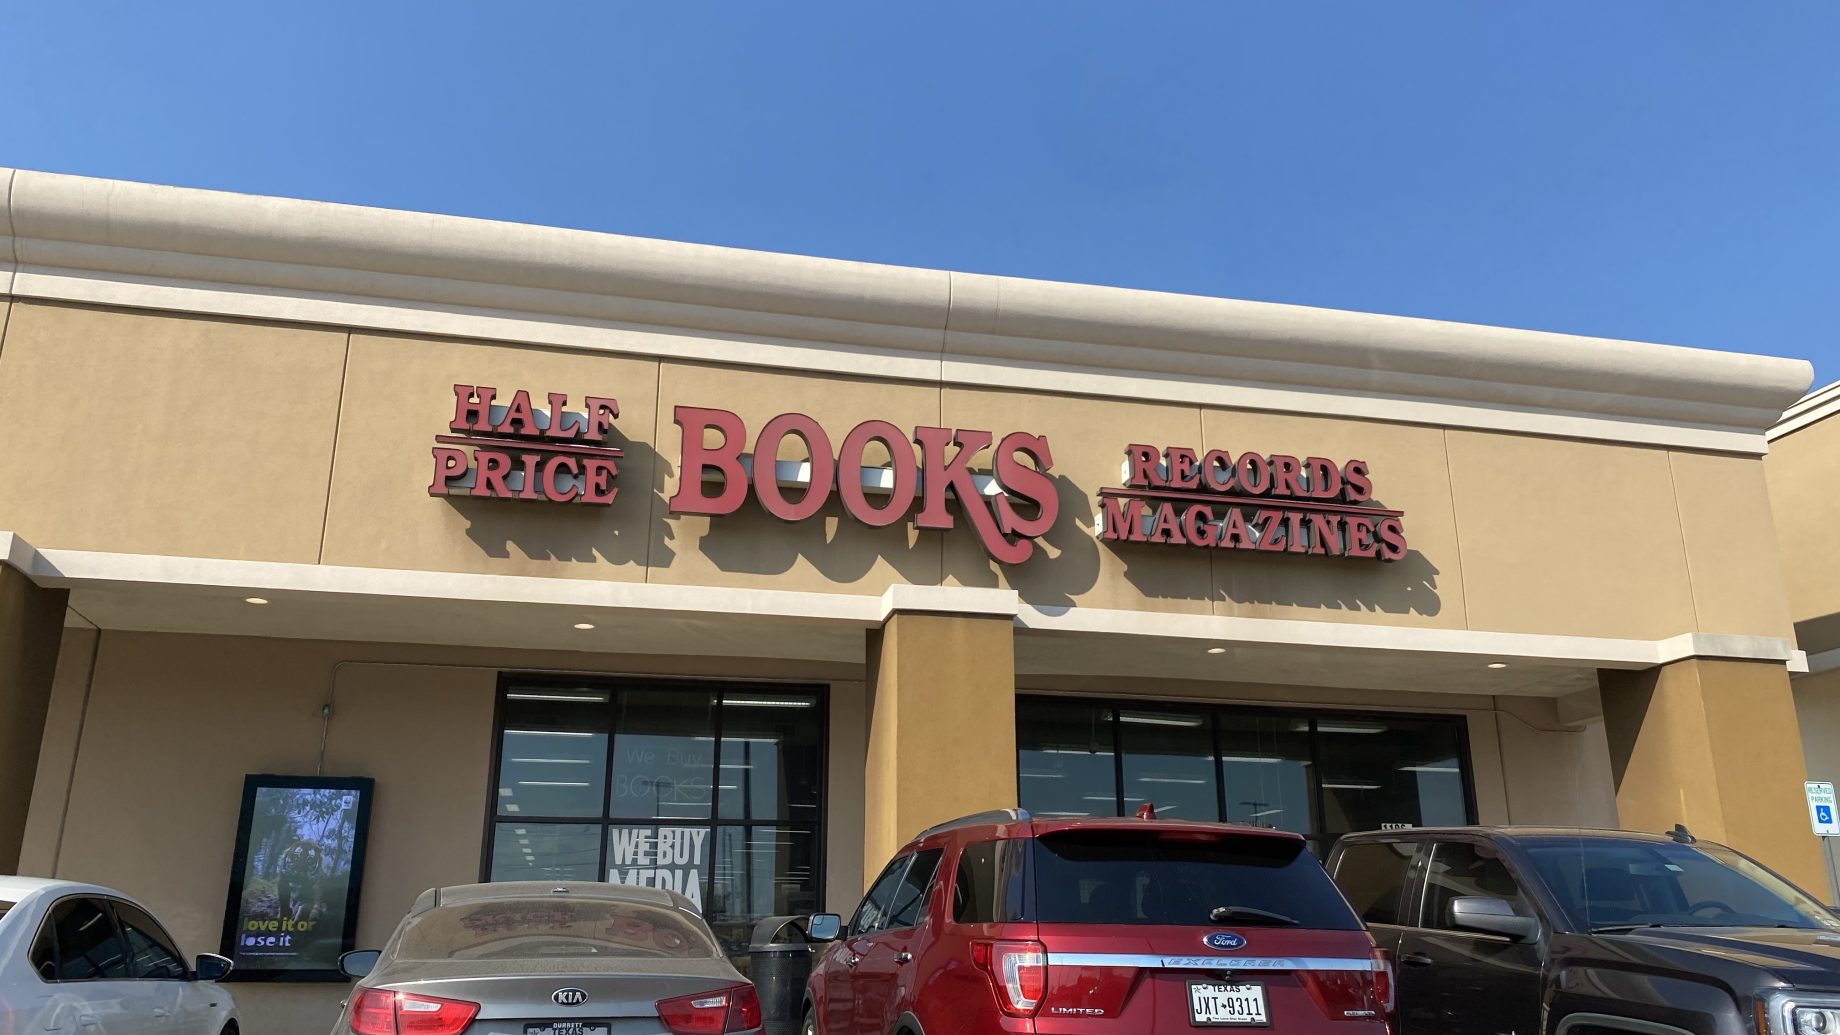 Half Price Books on X: We've moved! Our new Overland Park location is now  open. Stop by for a visit and enter to win a $500 HPB gift card!    /